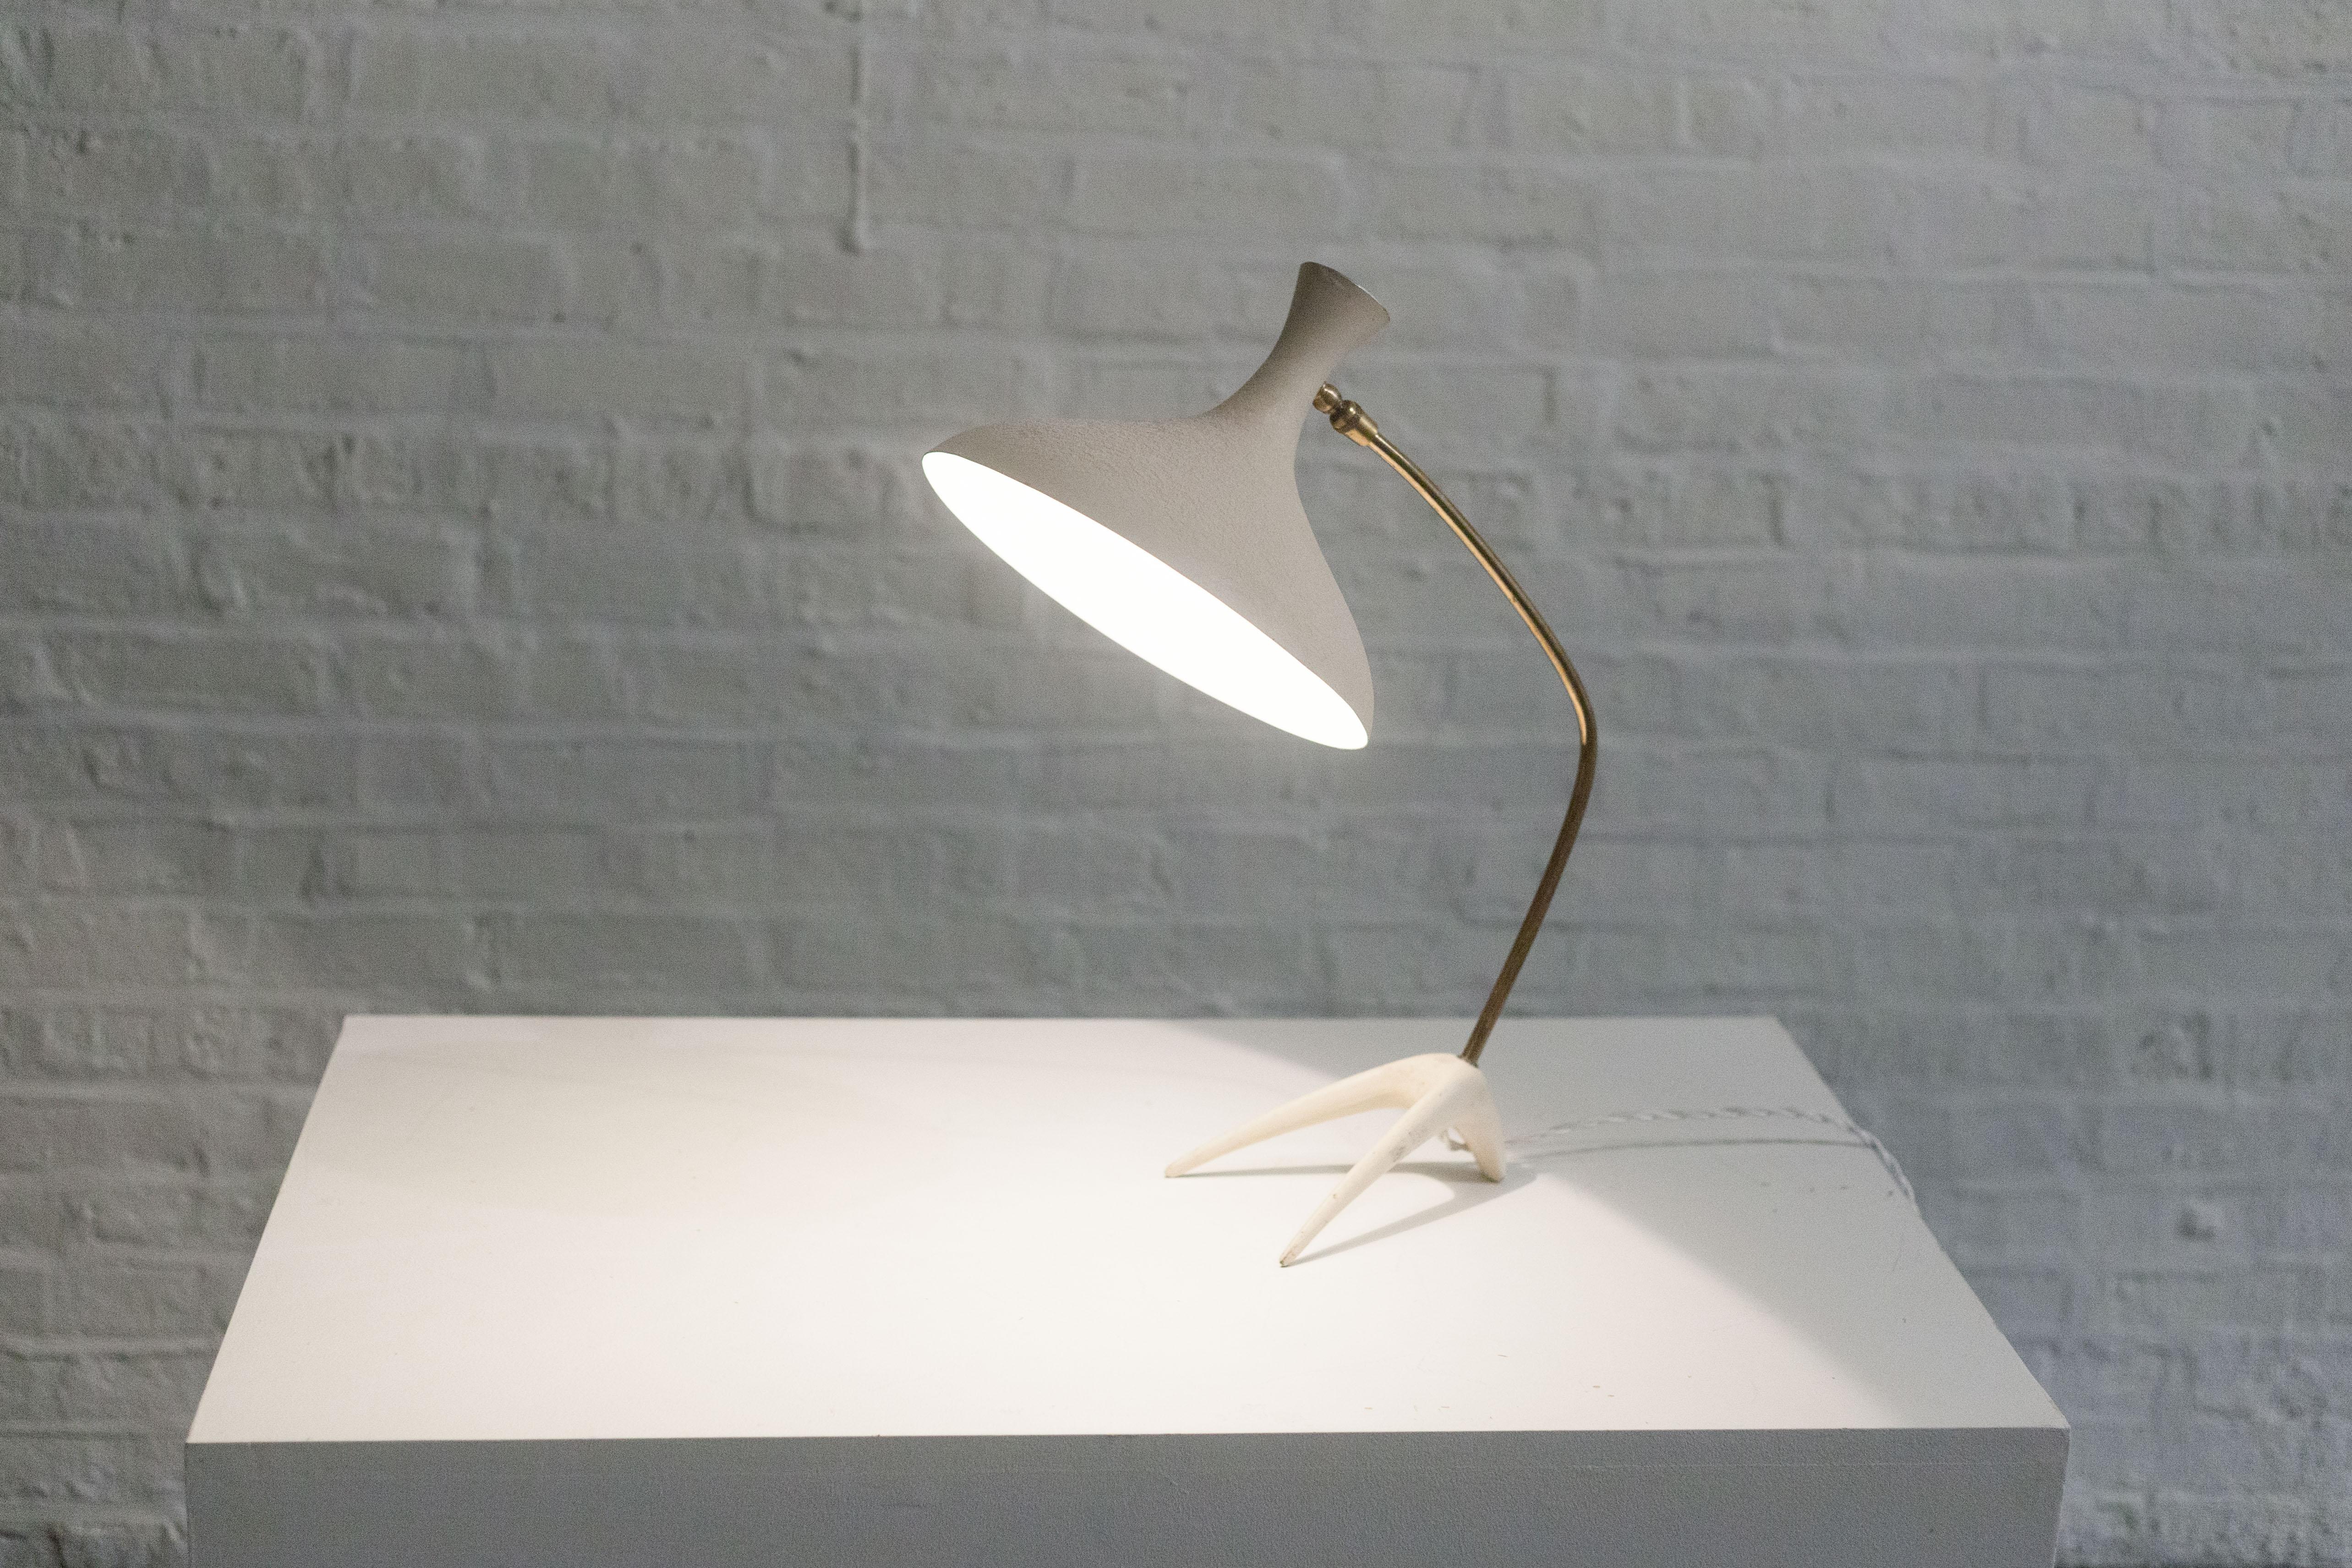 Imported from Germany, a mid-century 1950s lamp long attributed to Louis Kalff and now known to be Cosack Leuchten. 

The white metal shade with its biomorphic, organic form has an angelic trumpet like shape and its original crepe textured paint.